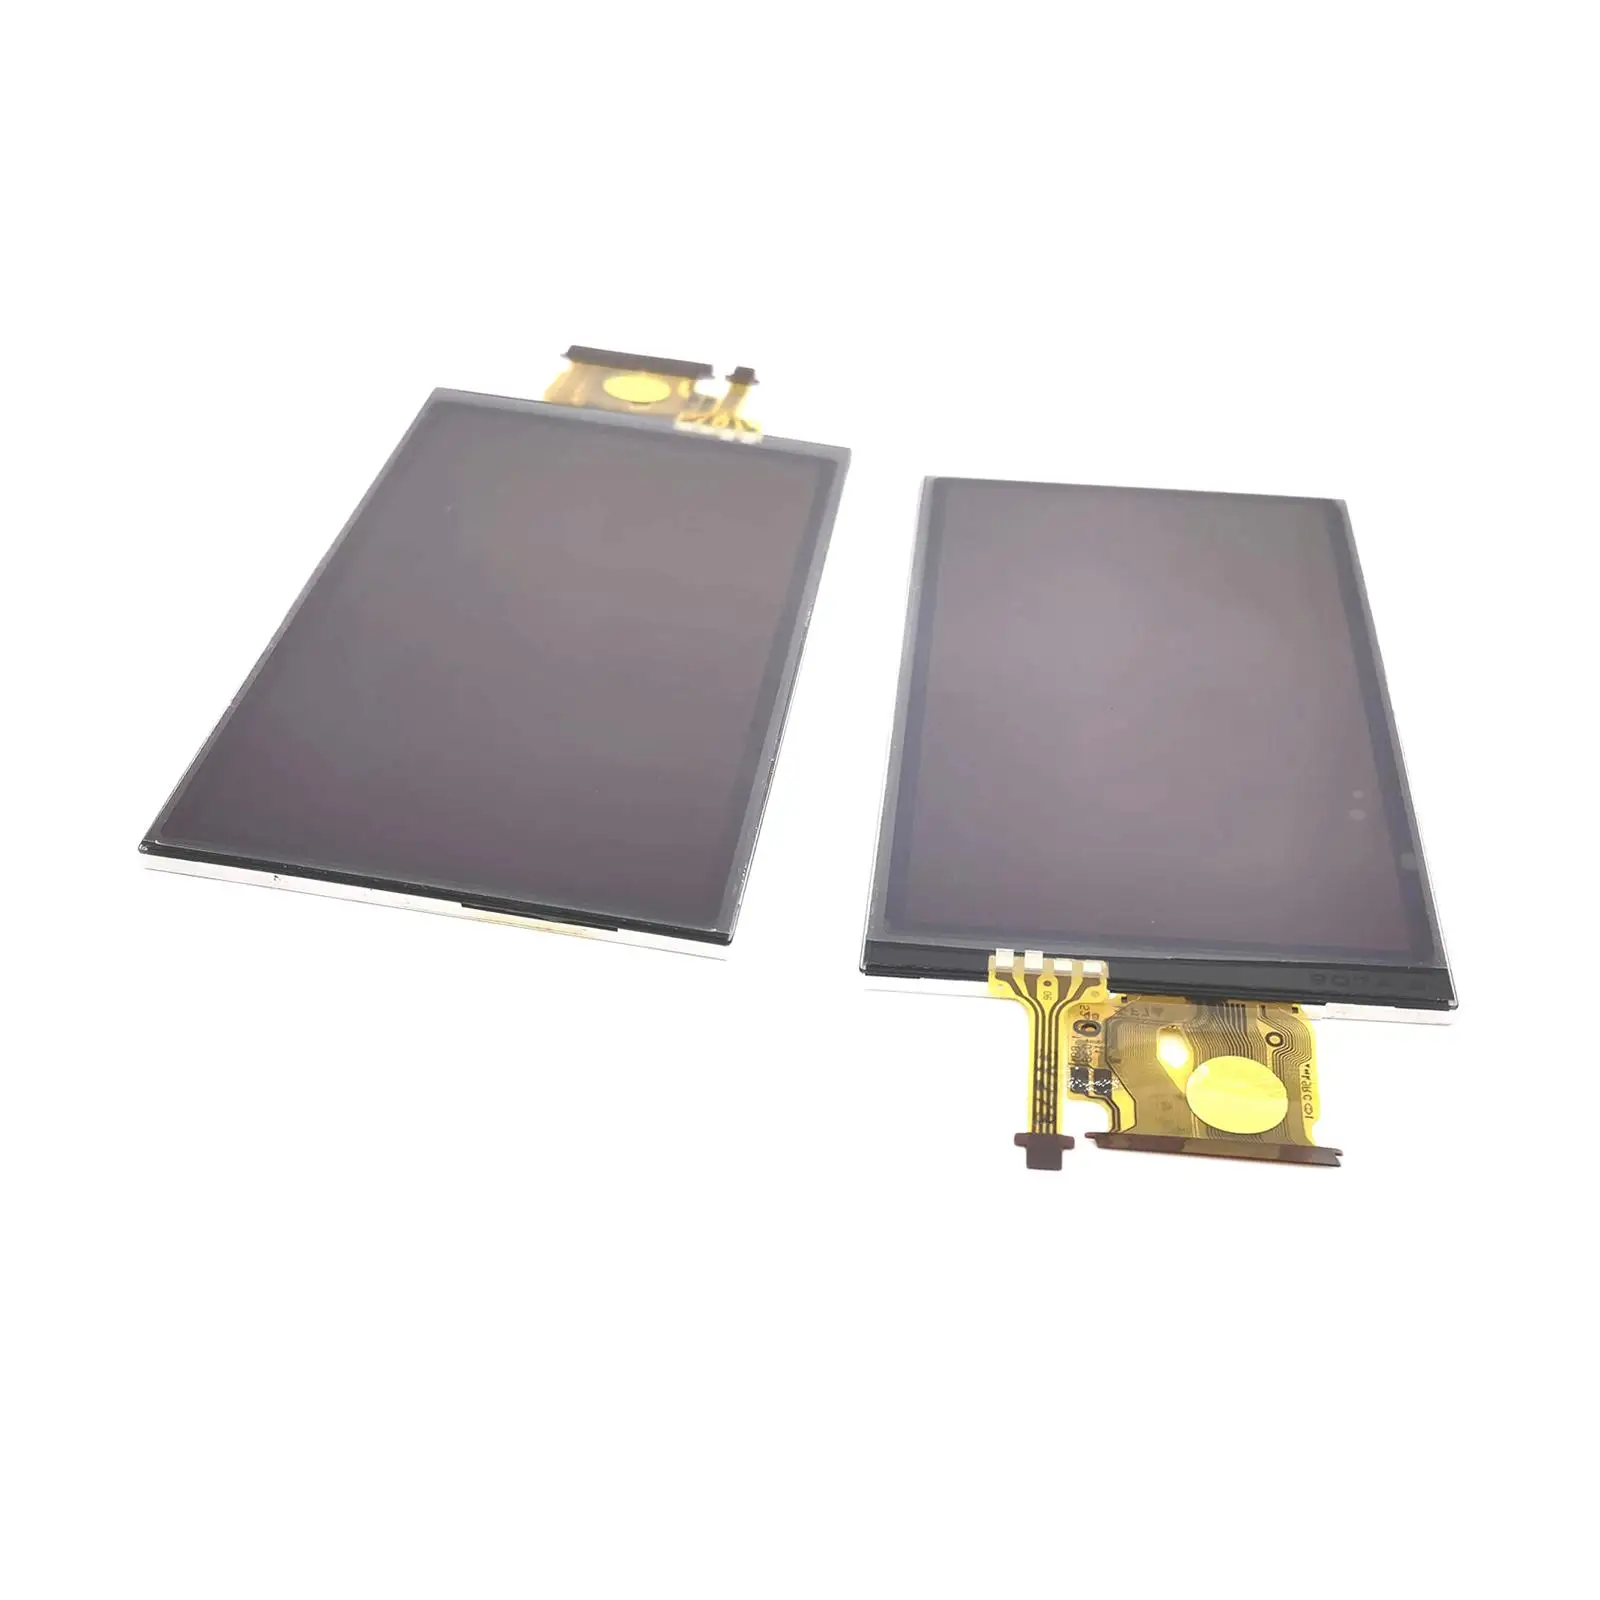 Professional Replacement LCD Display Screen with Touch Components Repair Part High Quality for Dsc-Tx7 TX9C XR550 TX9 TX7C